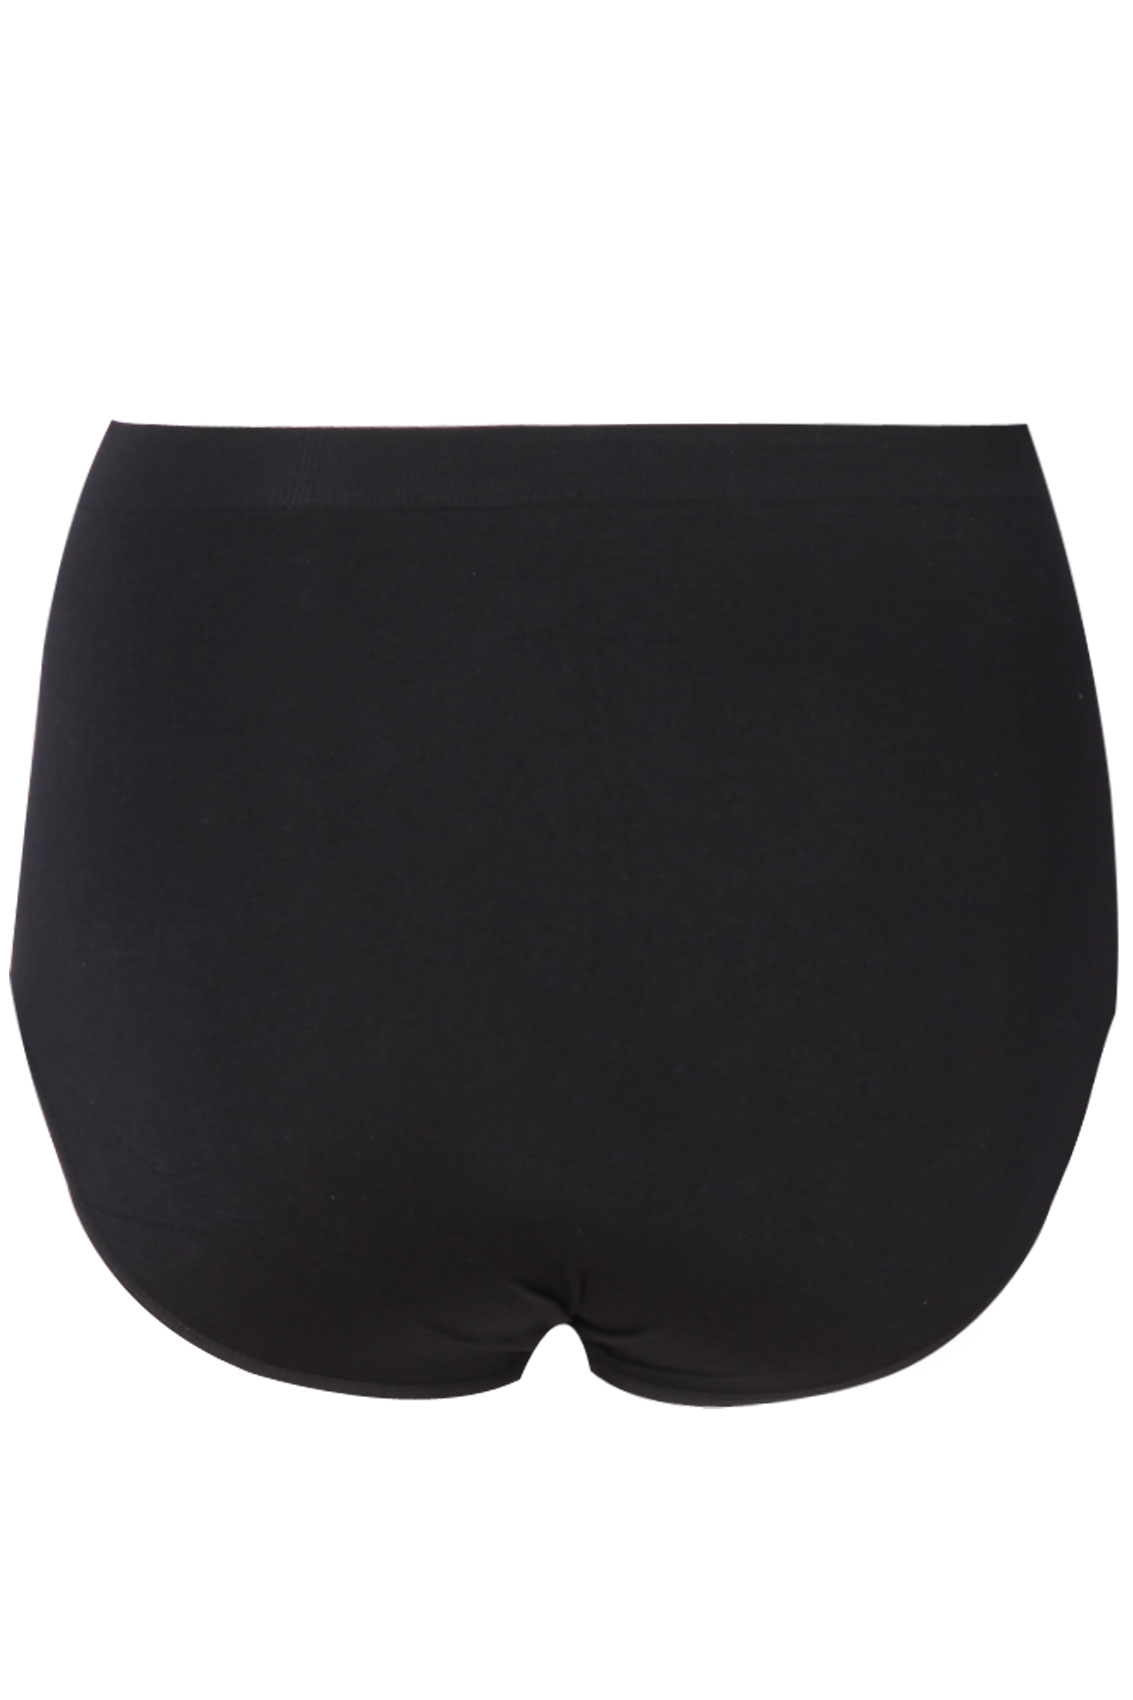 2-pack invisible light shaping briefs - Black - Ladies